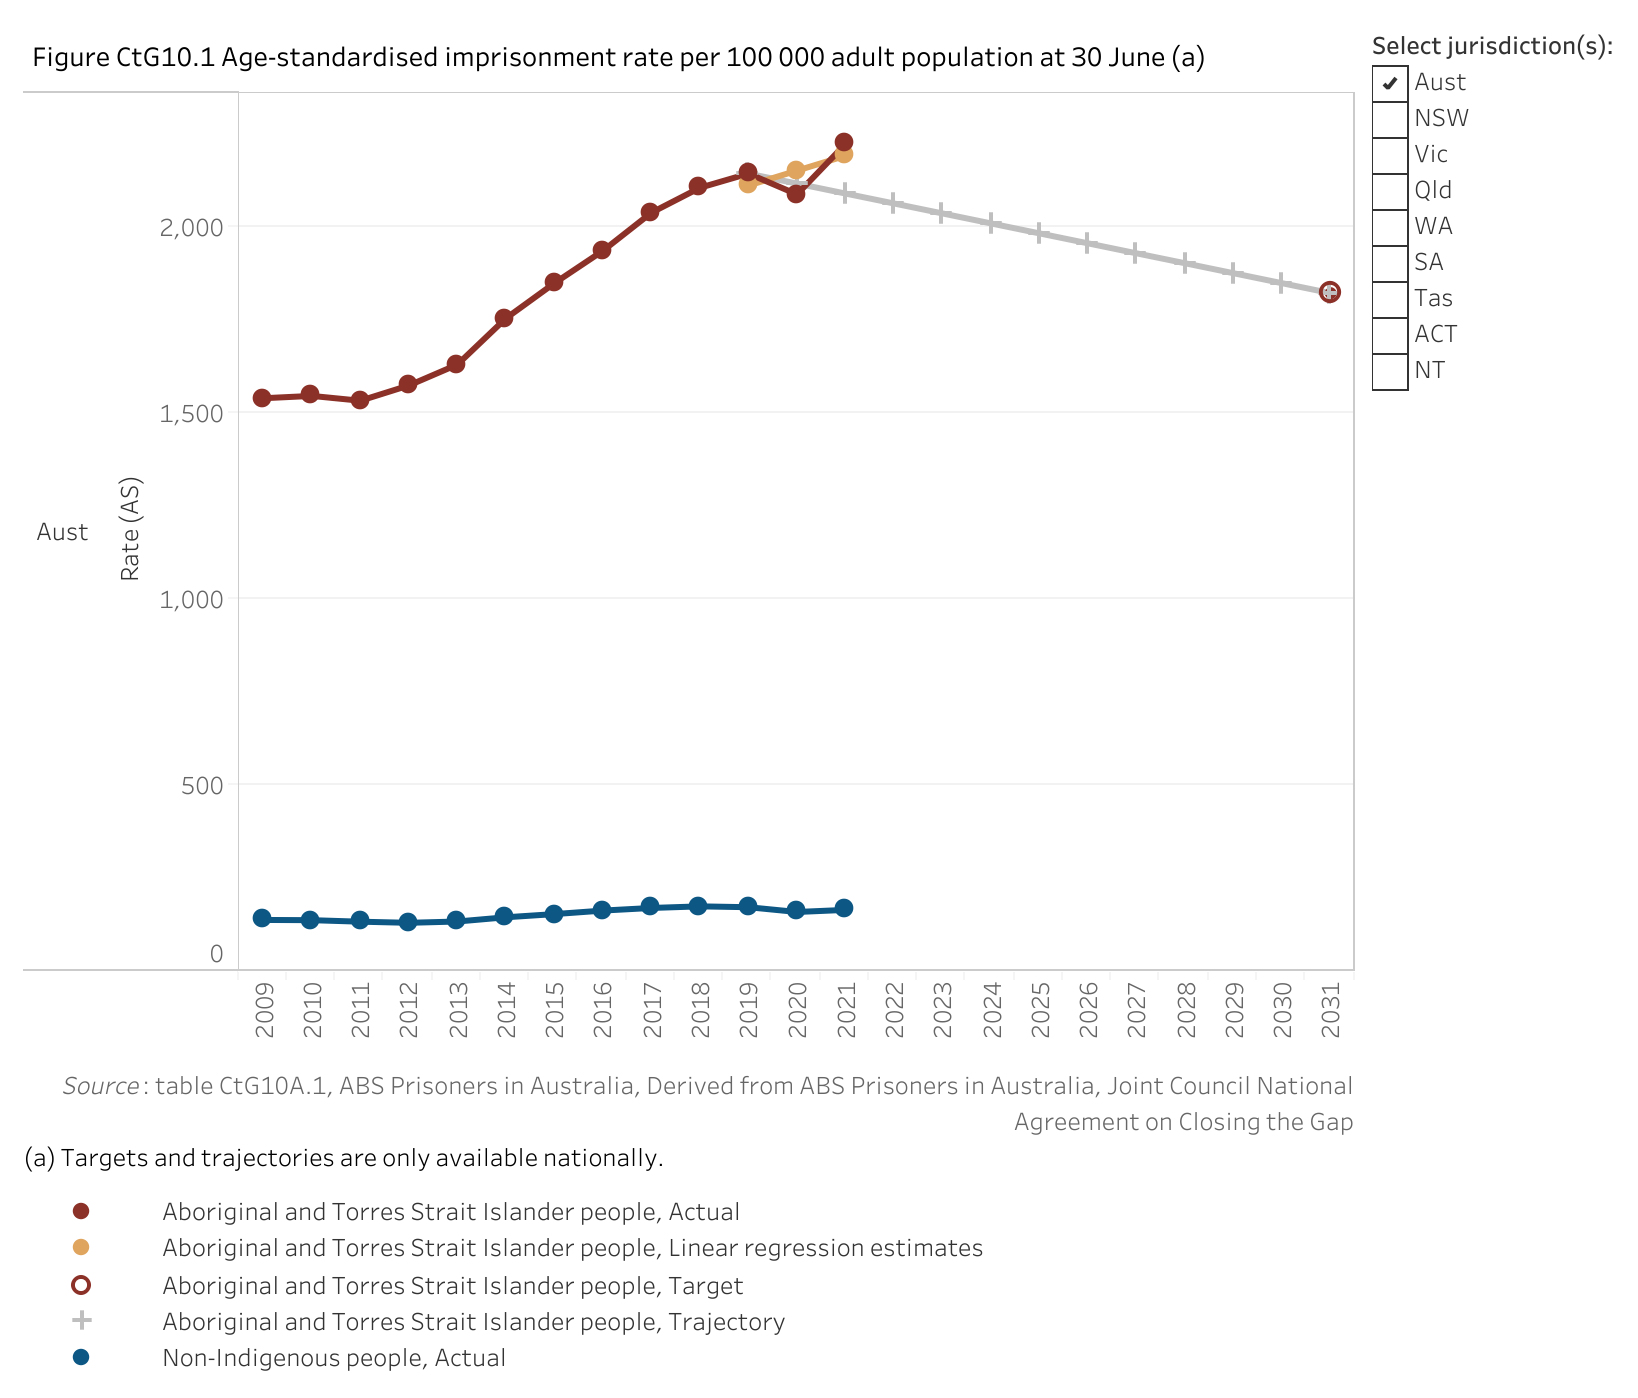 Figure CtG10.1. Line chart showing the age-standardised imprisonment rate for Aboriginal and Torres Strait Islander people and non-Indigenous people. Along with these rates, a linear regression is displayed that shows the data trend for the target. The aim under Closing the Gap is to reduce the rate for Aboriginal and Torres Strait Islander people by at least 15 per cent by 2031. With the 2019 baseline value of 2142.9 per 100,000 adult population, this means a reduction to a target value of 1821.5 per 100,000 adult population by 2031.